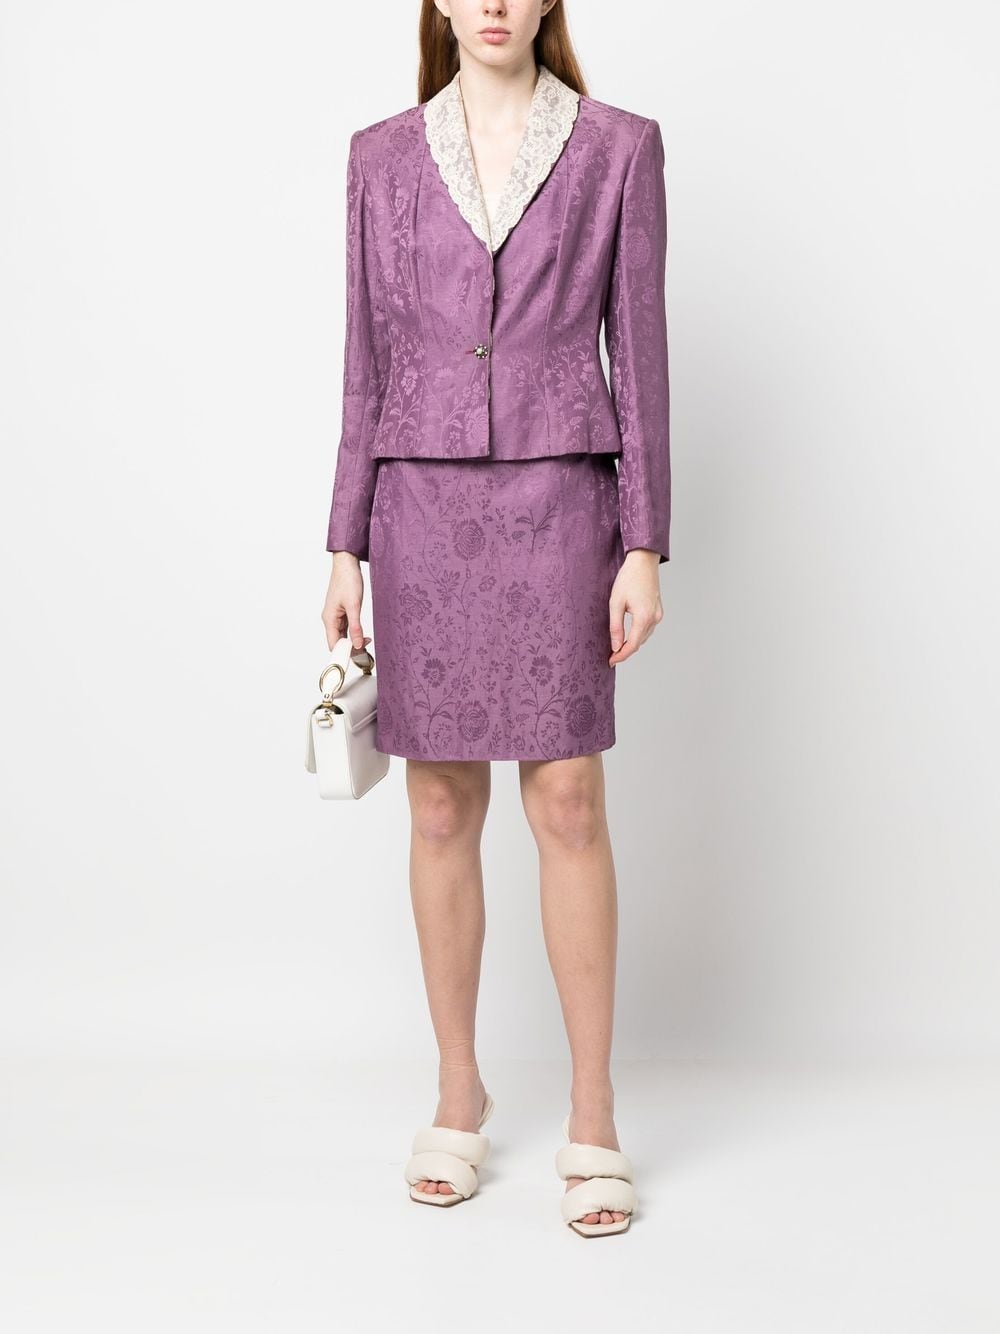 Louis Feraud Pre-Owned Printed Skirt Suit - Farfetch